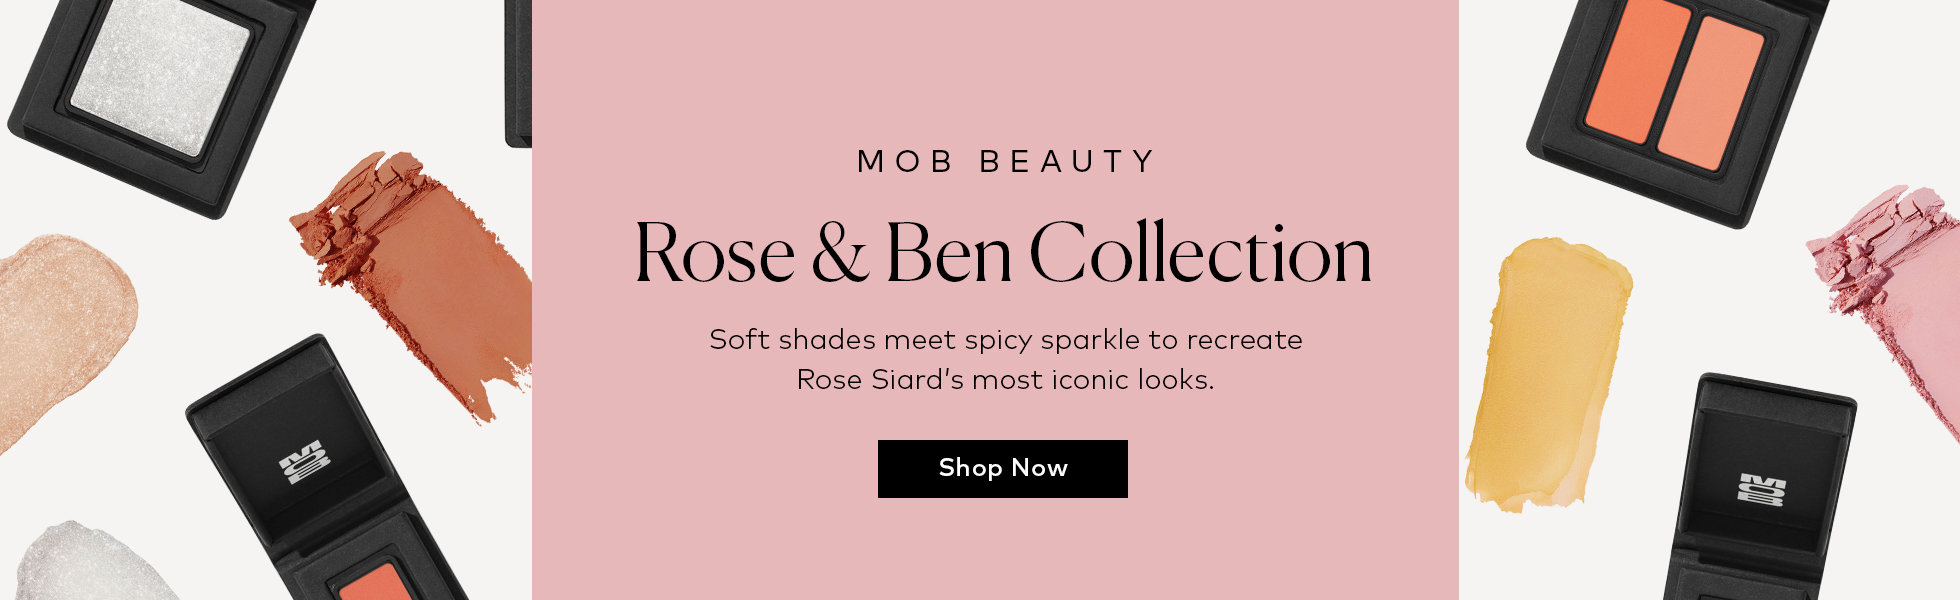 Shop the MOB Beauty Rose & Ben Collection at Beautylish.com